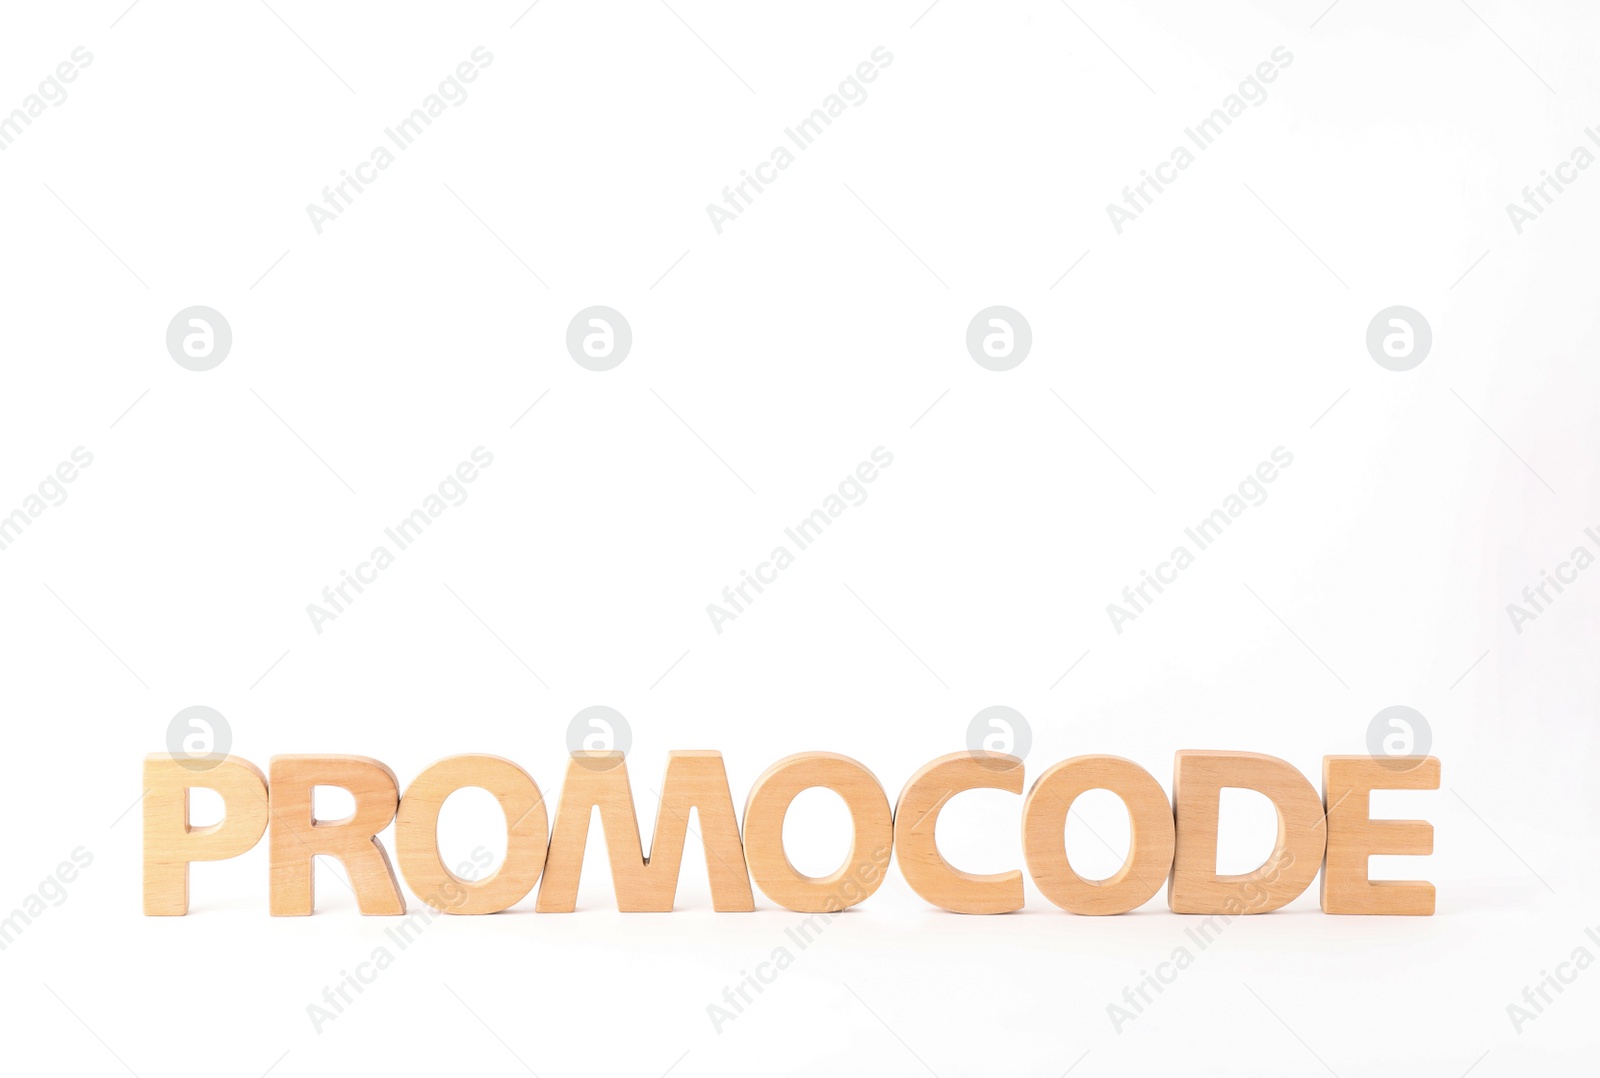 Photo of Words Promo Code made of wooden letters on white background